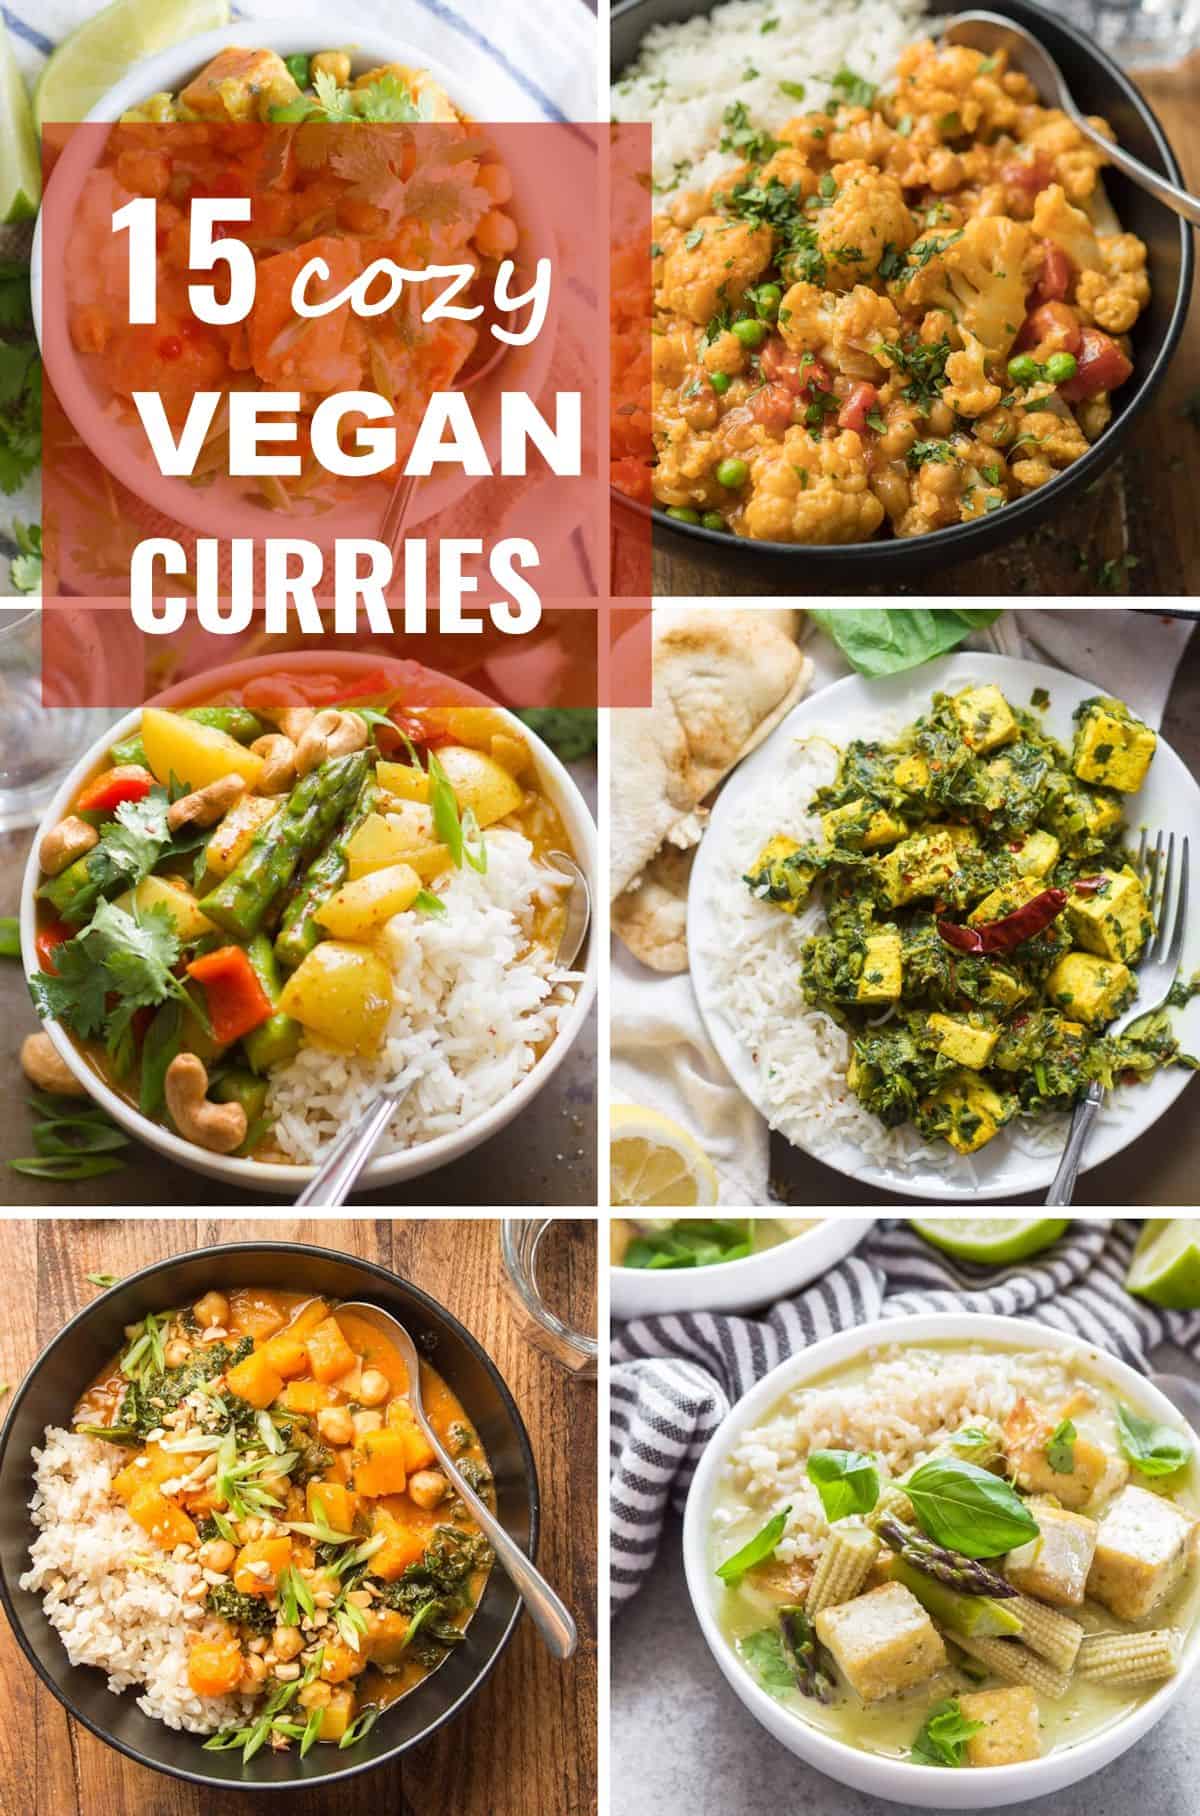 Collage of Vegan Curries with Text Overlay Reading "15 Cozy Vegan Curries"